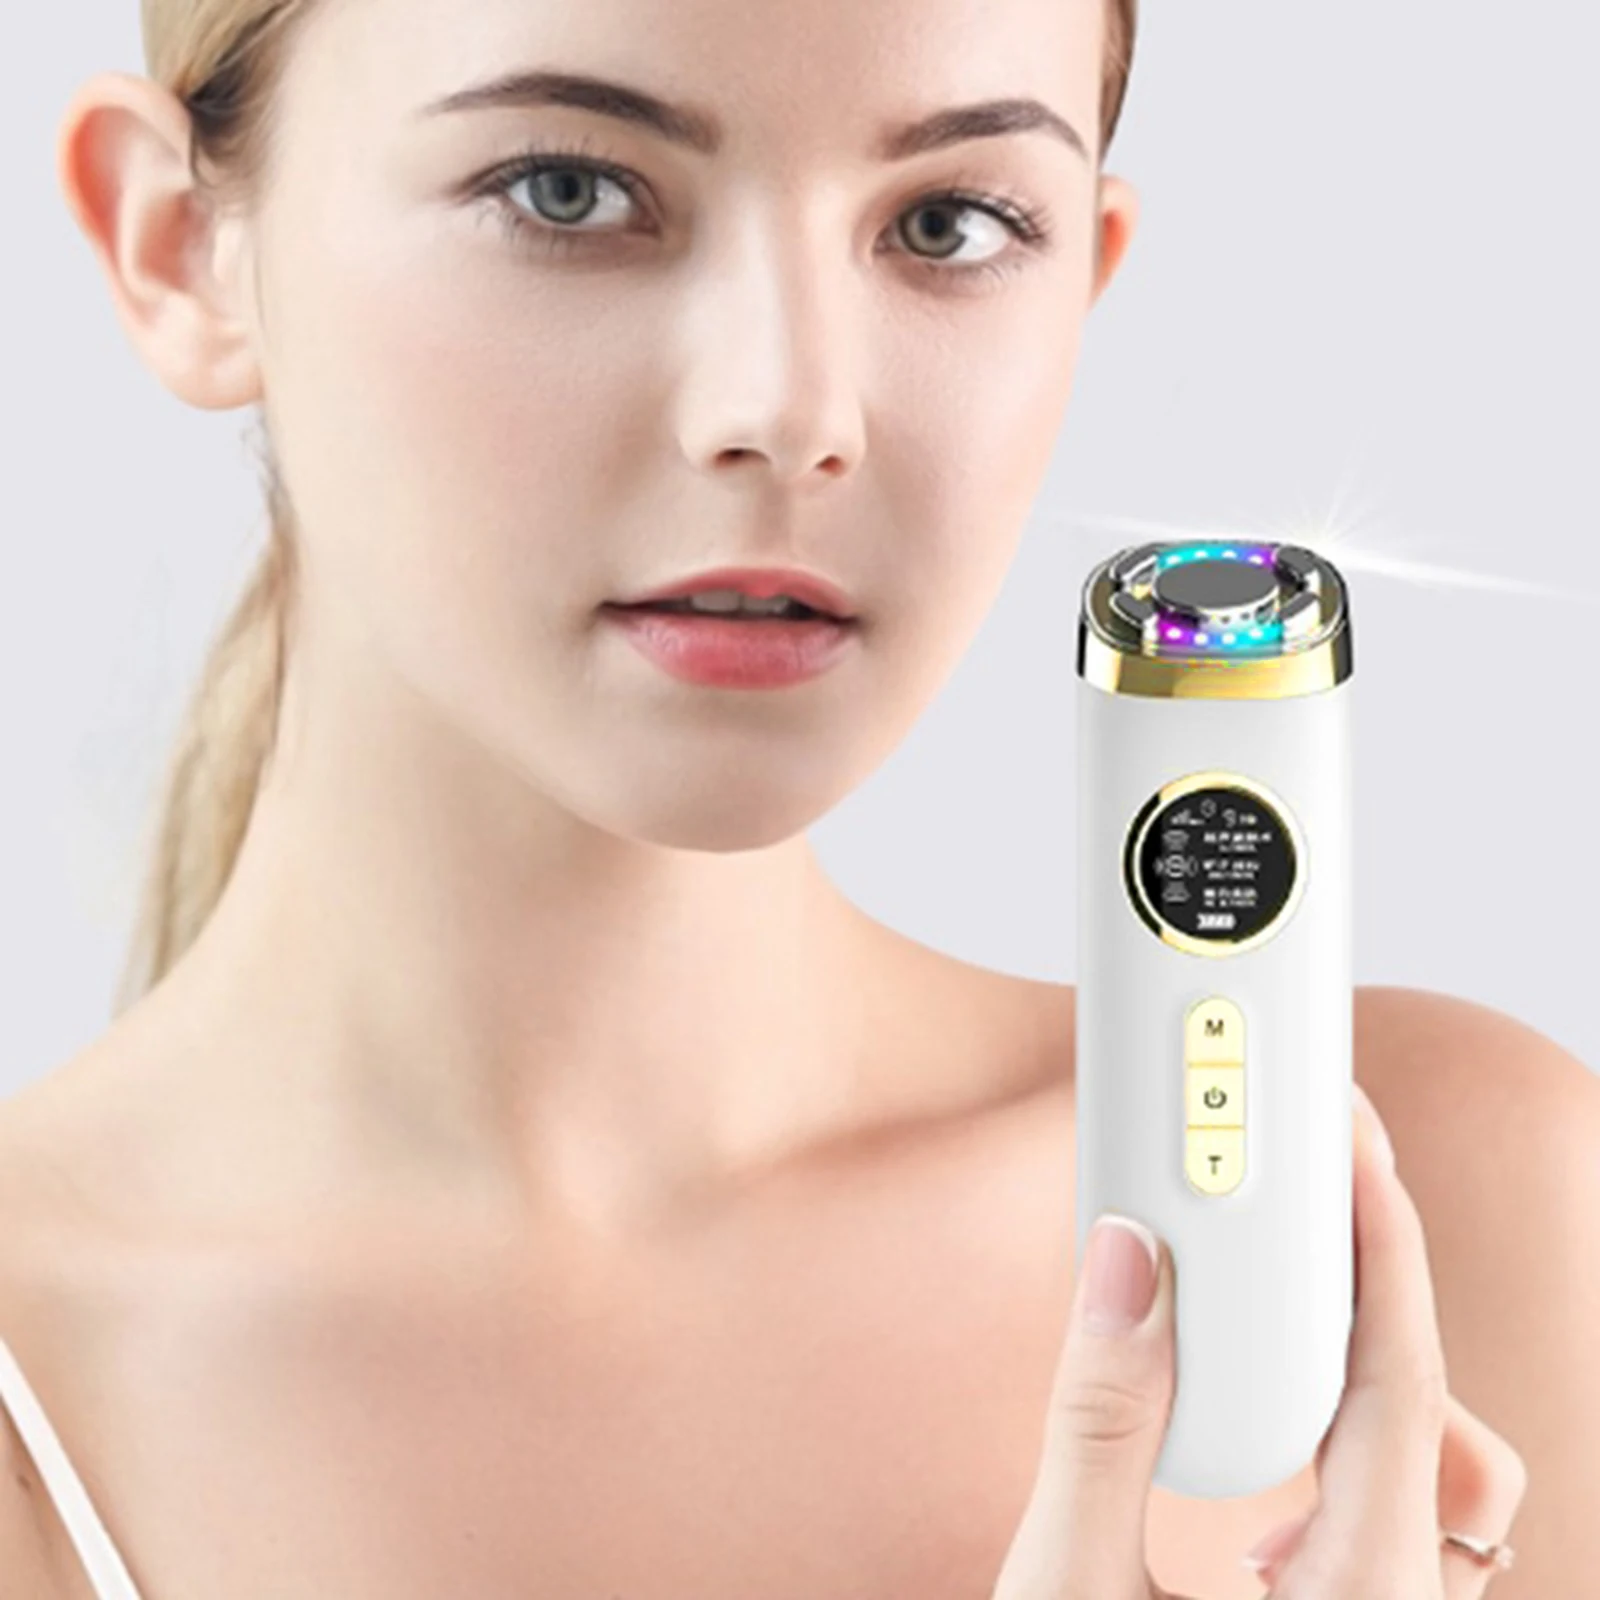 Hot and Cold Face Massager Facial Device Skin Firming Face Toning Machine Sonic Beauty Device for Wrinkle Removal, Anti Aging,